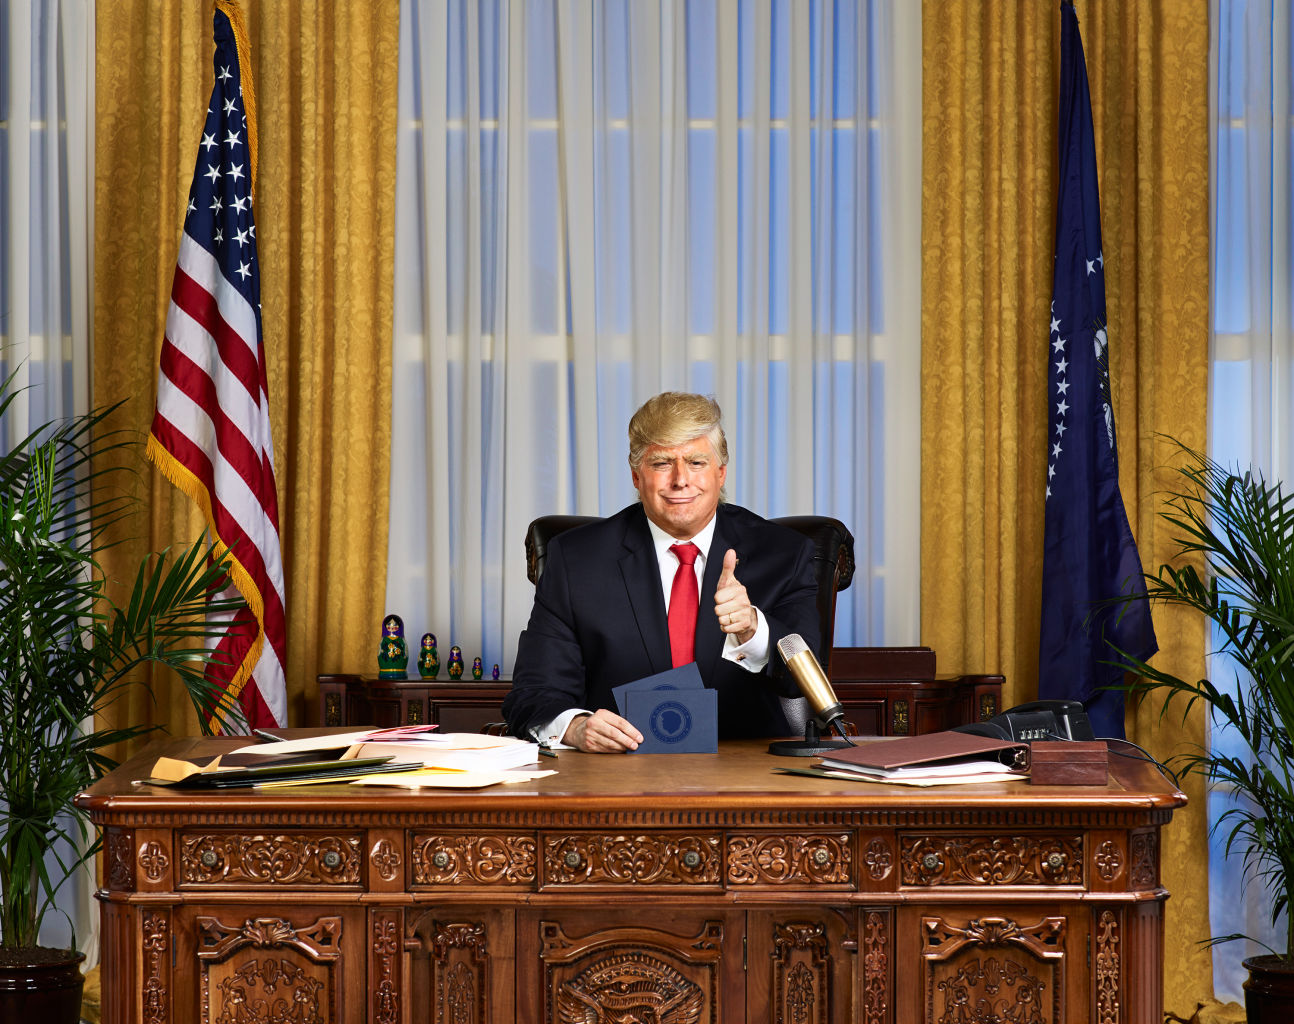 Anthony Atamanuik gets his own late-night showcase on Comedy Central in “The President Show”